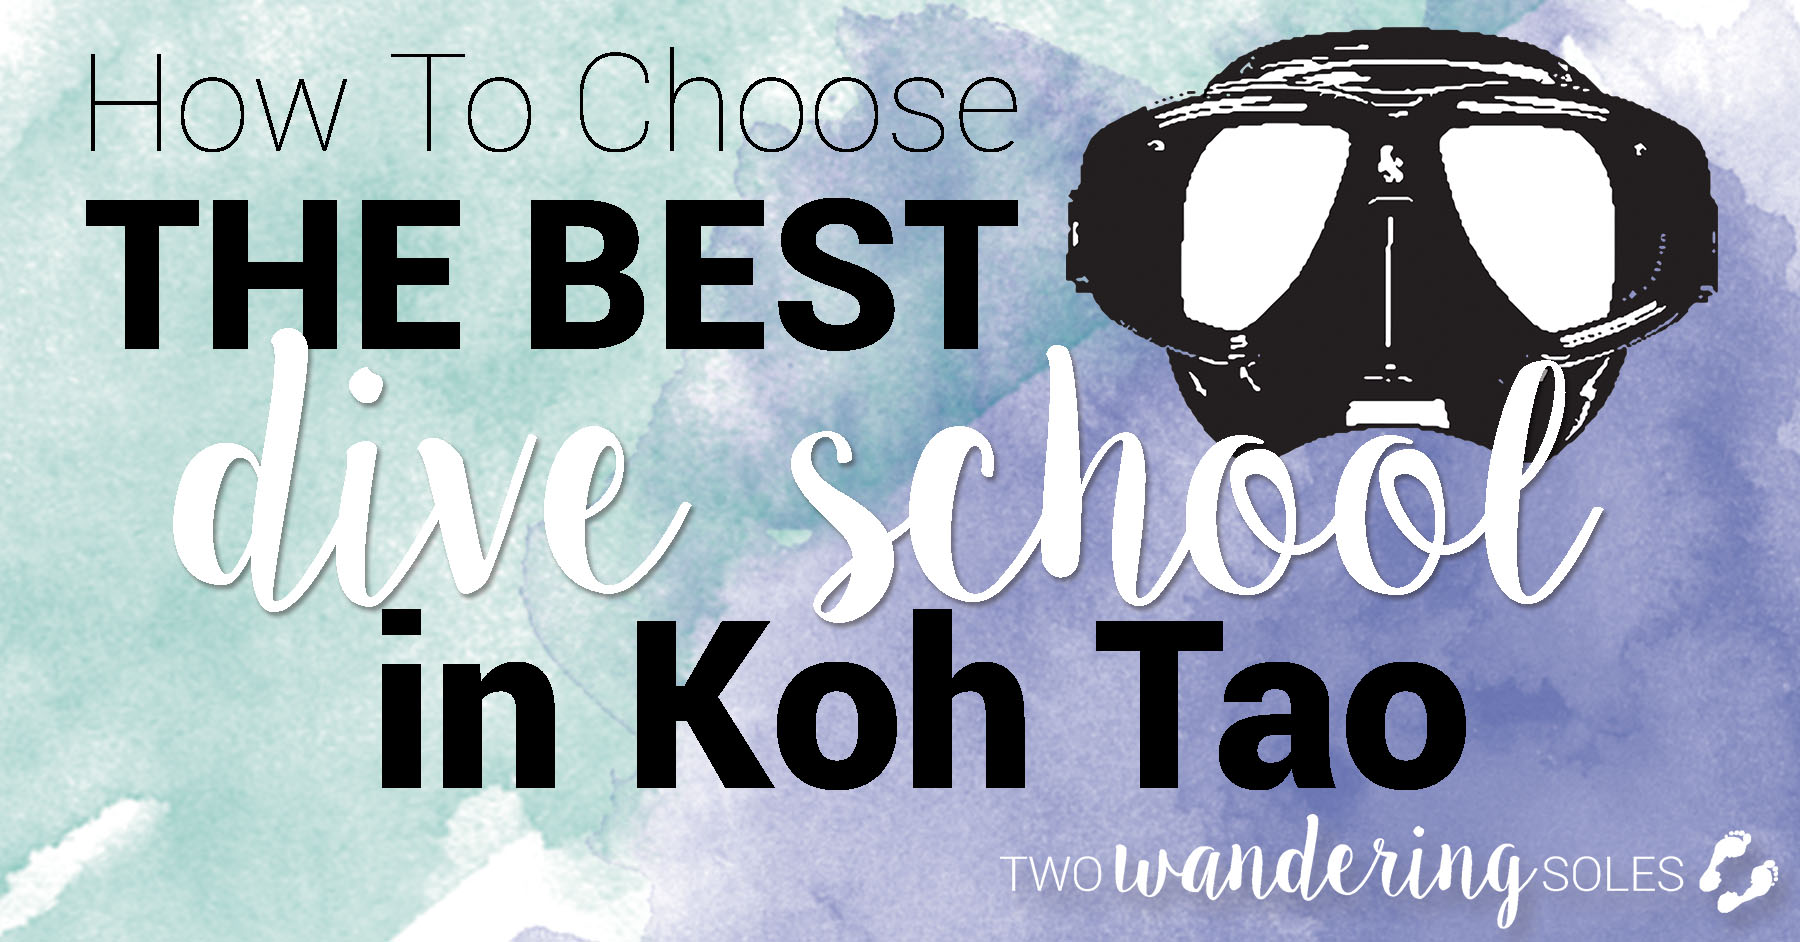 How to Choose the Best Dive School in Koh Tao